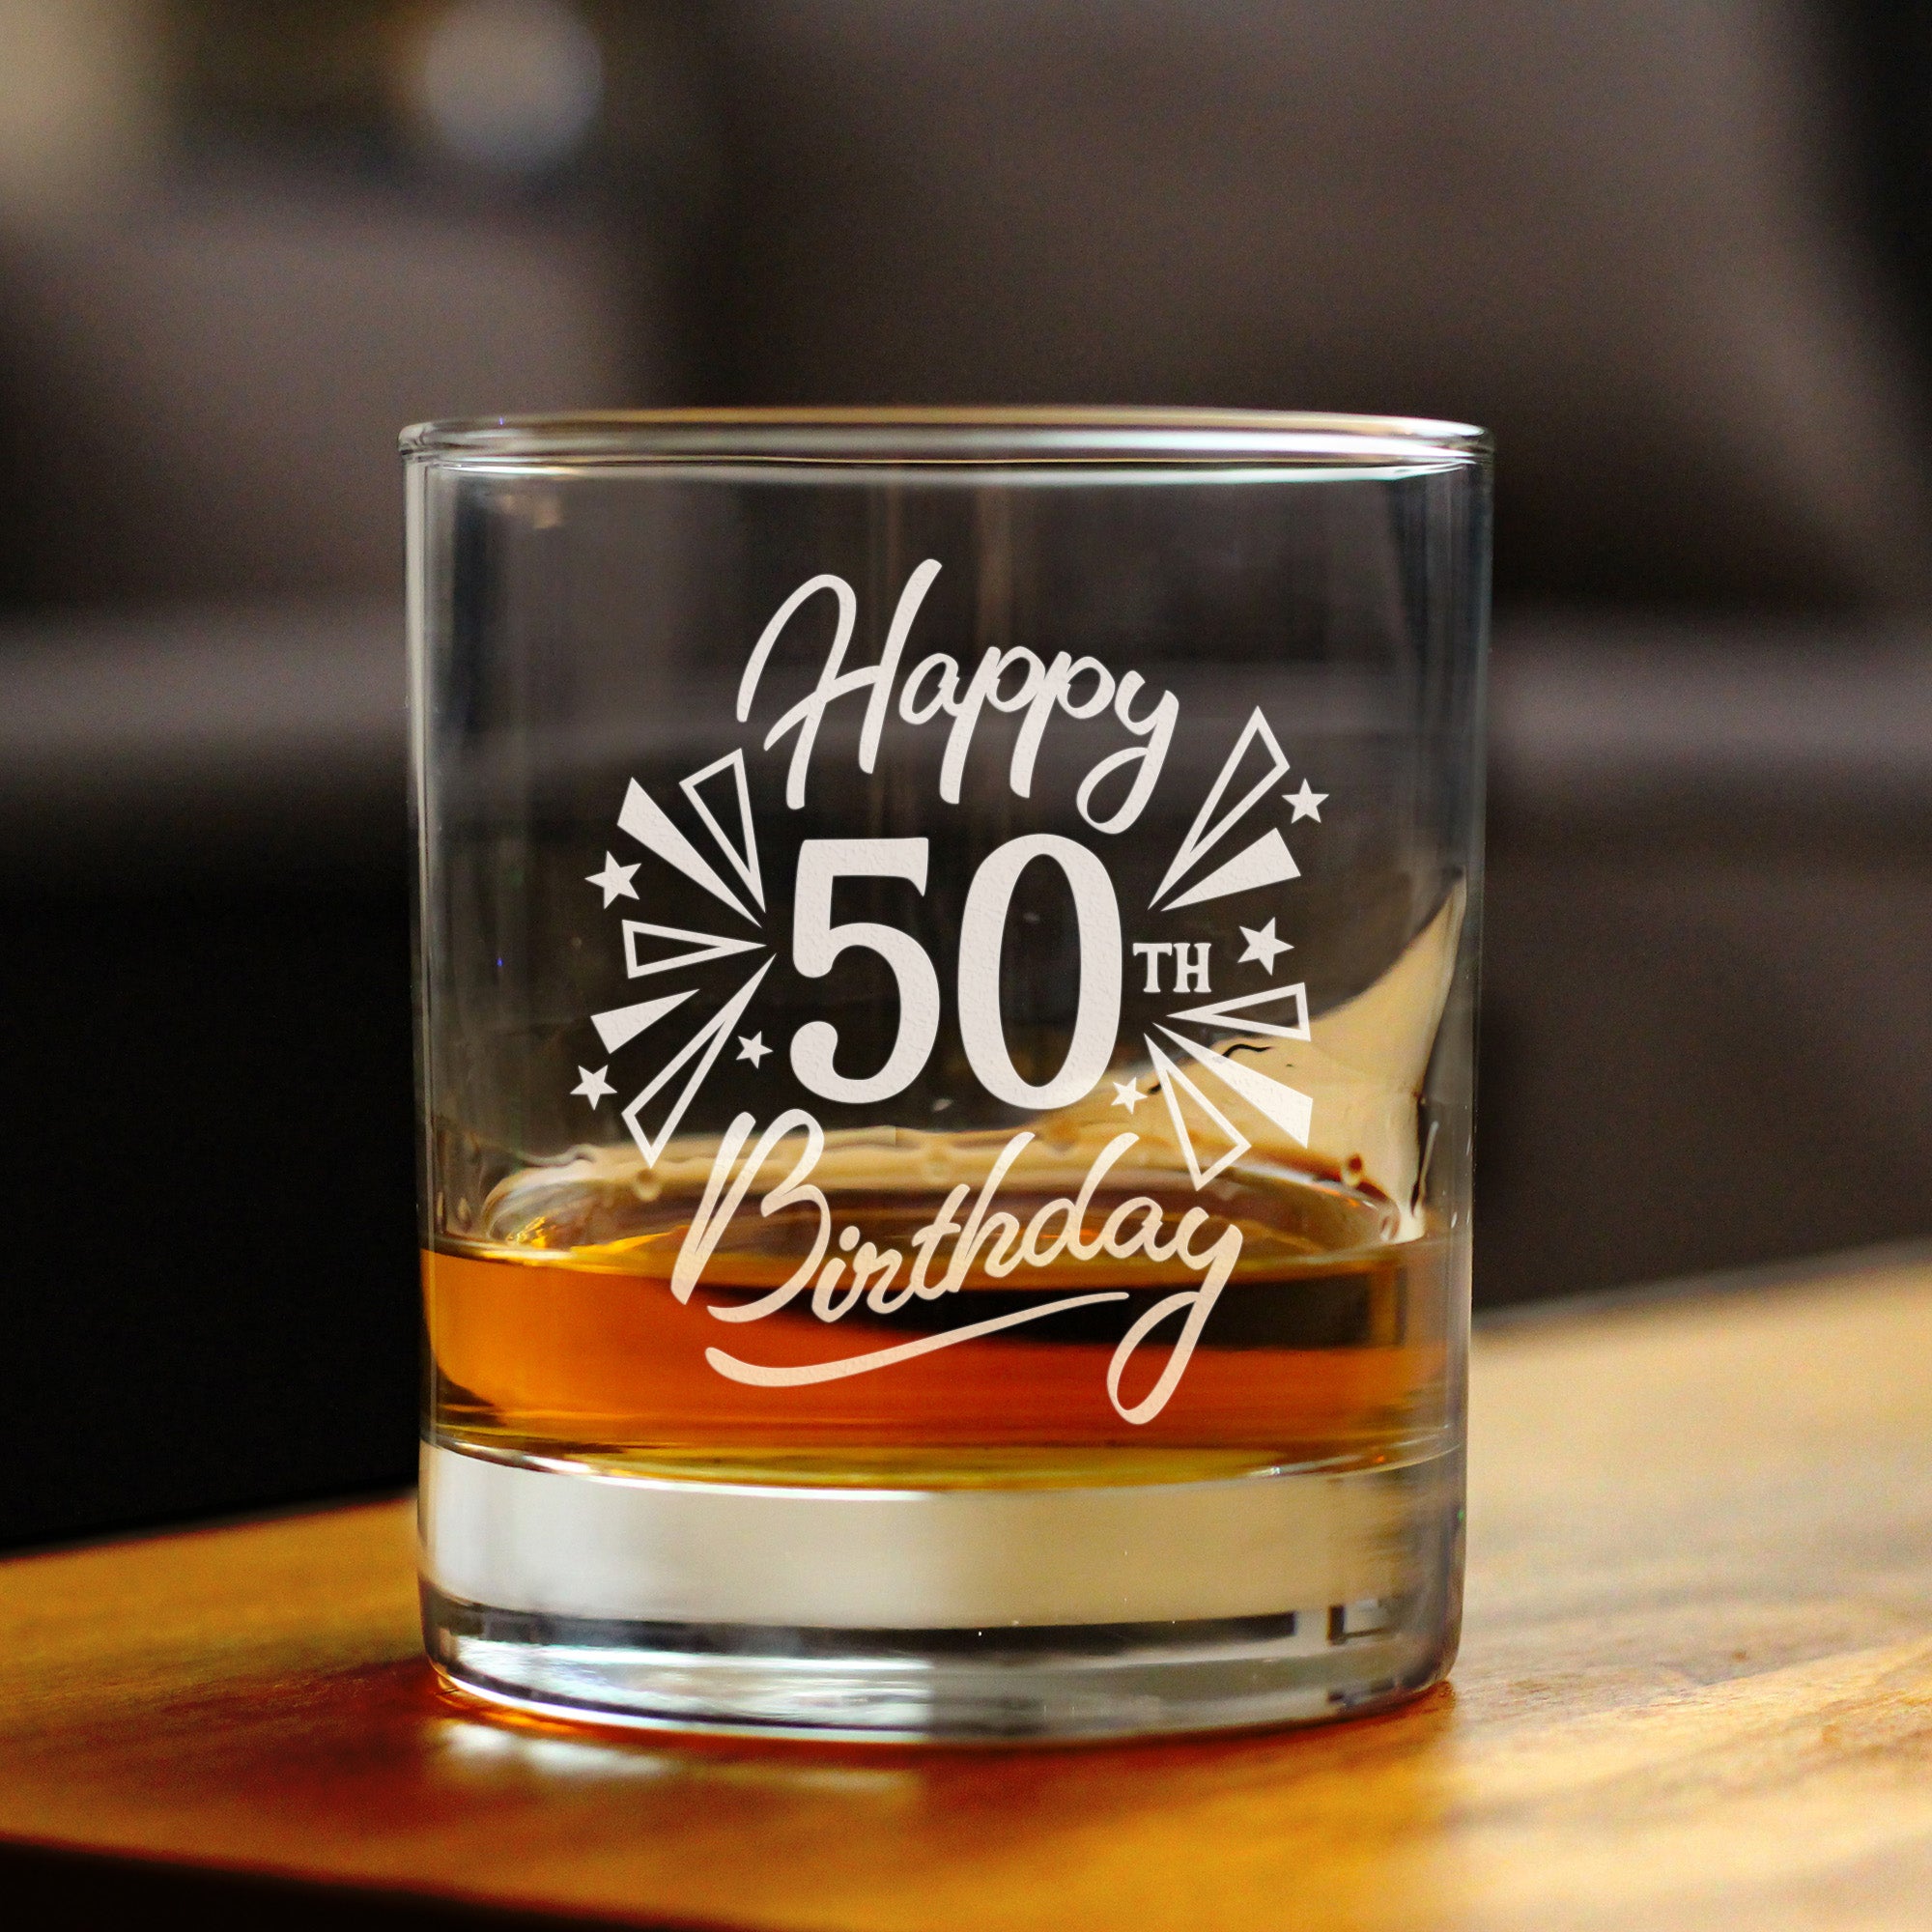 14 Best 50th Birthday Gift Ideas For Men (especially the last one!) - This  Gifts for Men